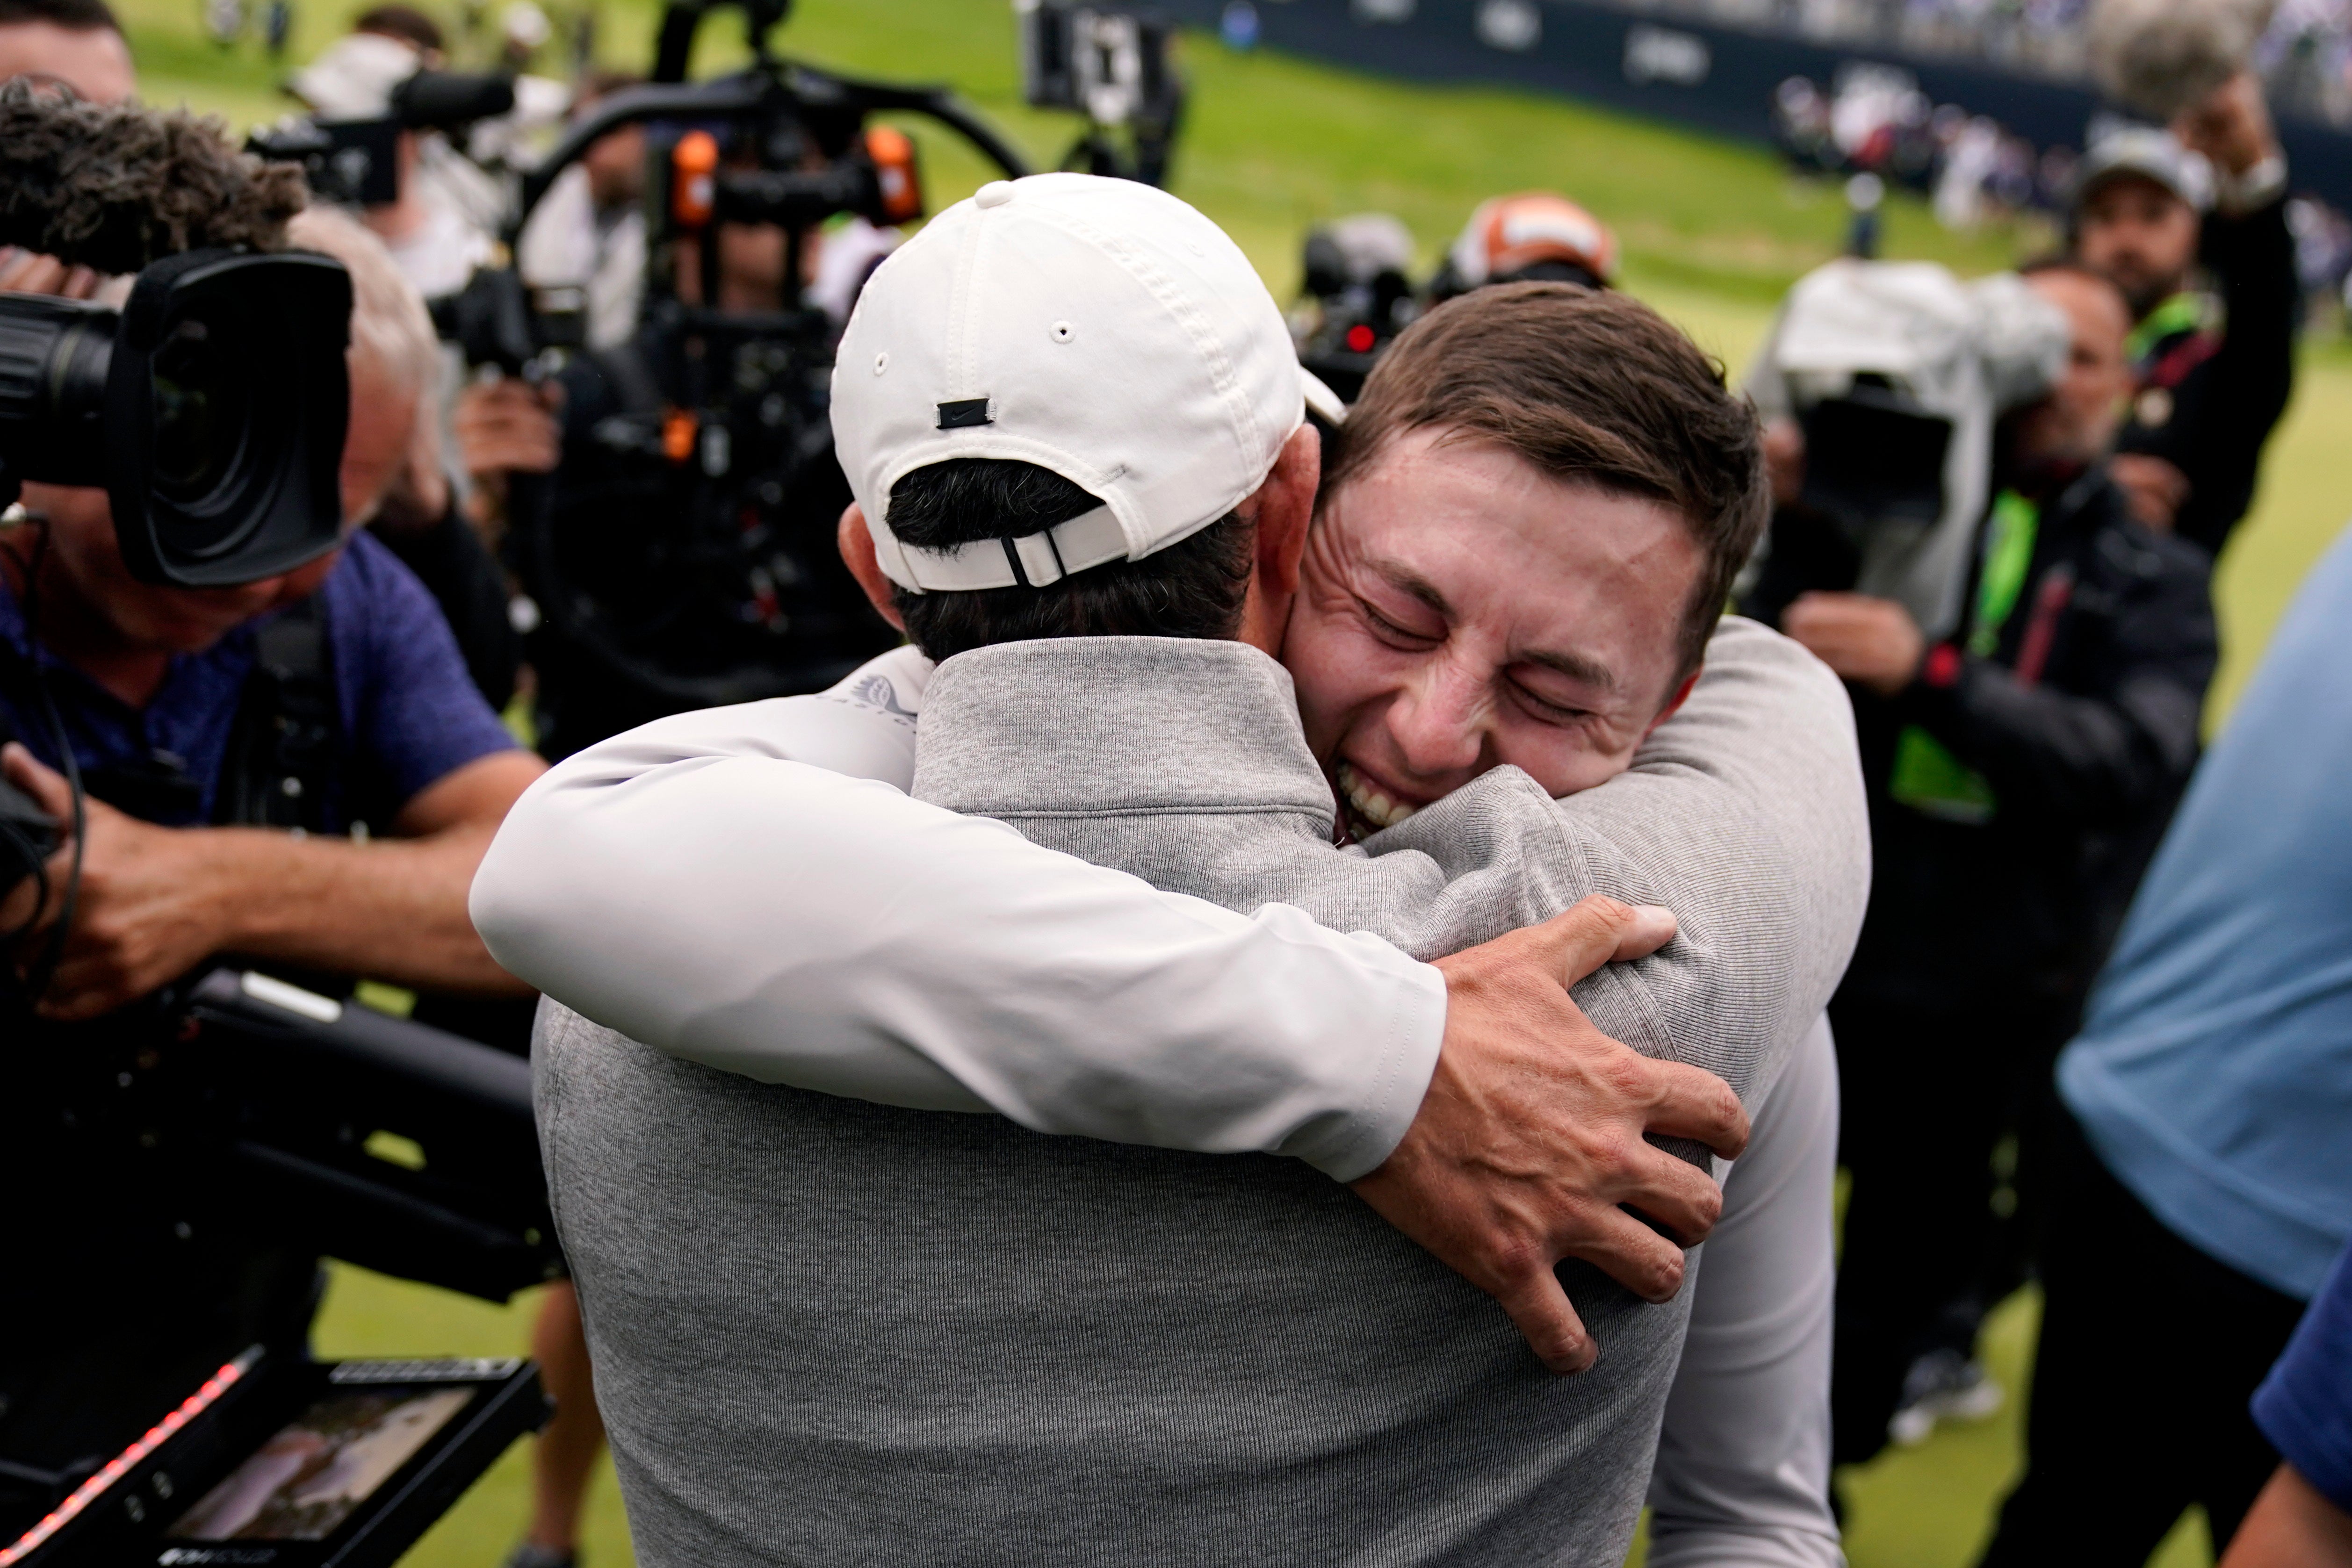 Matthew Fitzpatrick, right, is congratulated by Rory McIlroy after winning the US Open (Charles Krupa/AP)